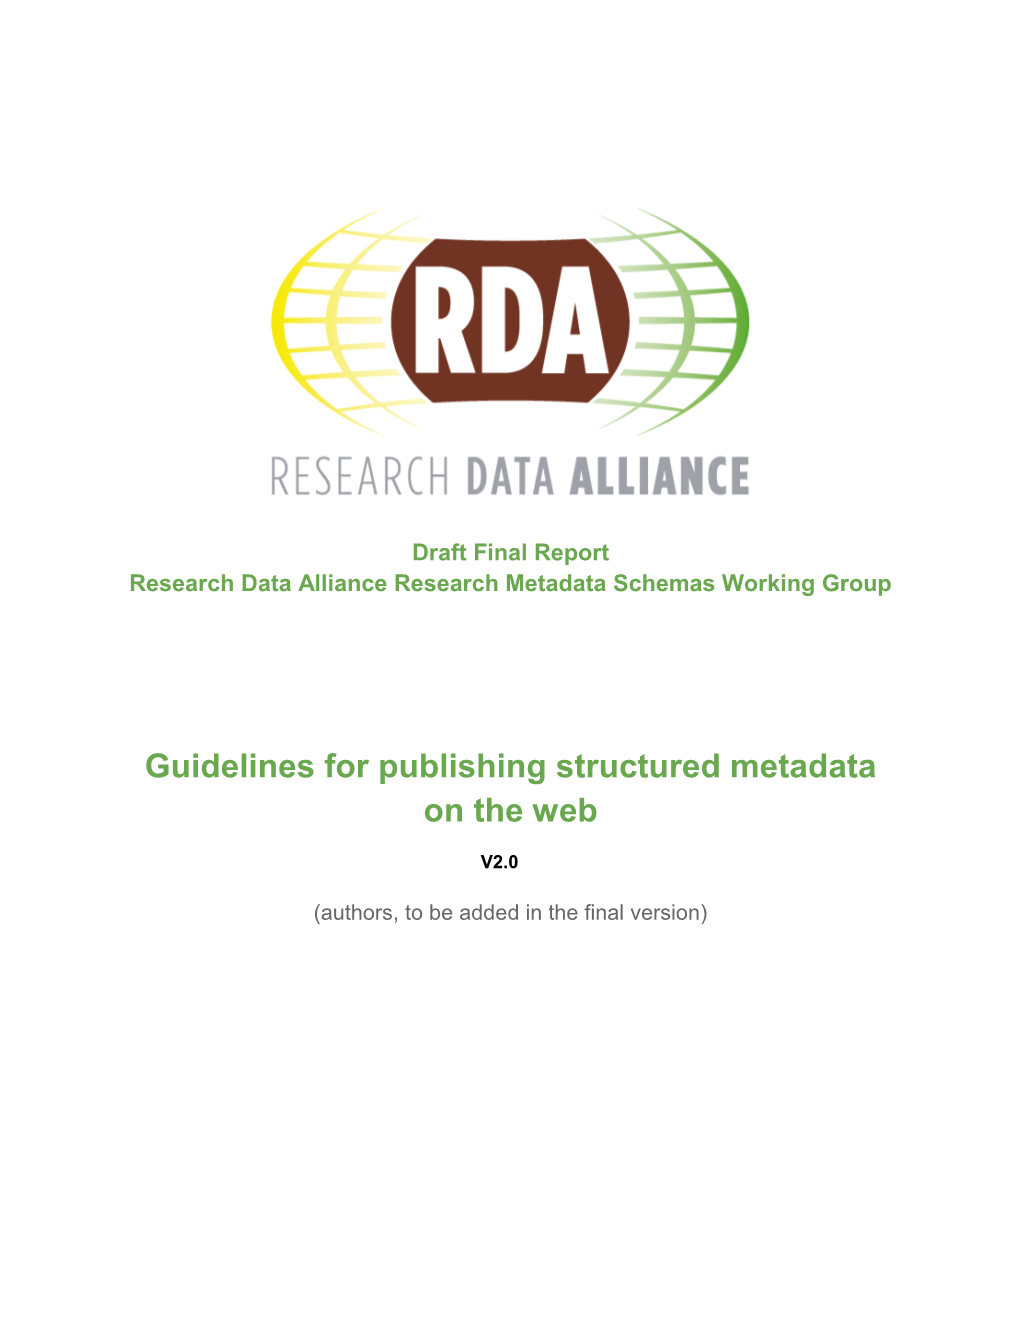 Guidelines for Publishing Structured Metadata on the Web